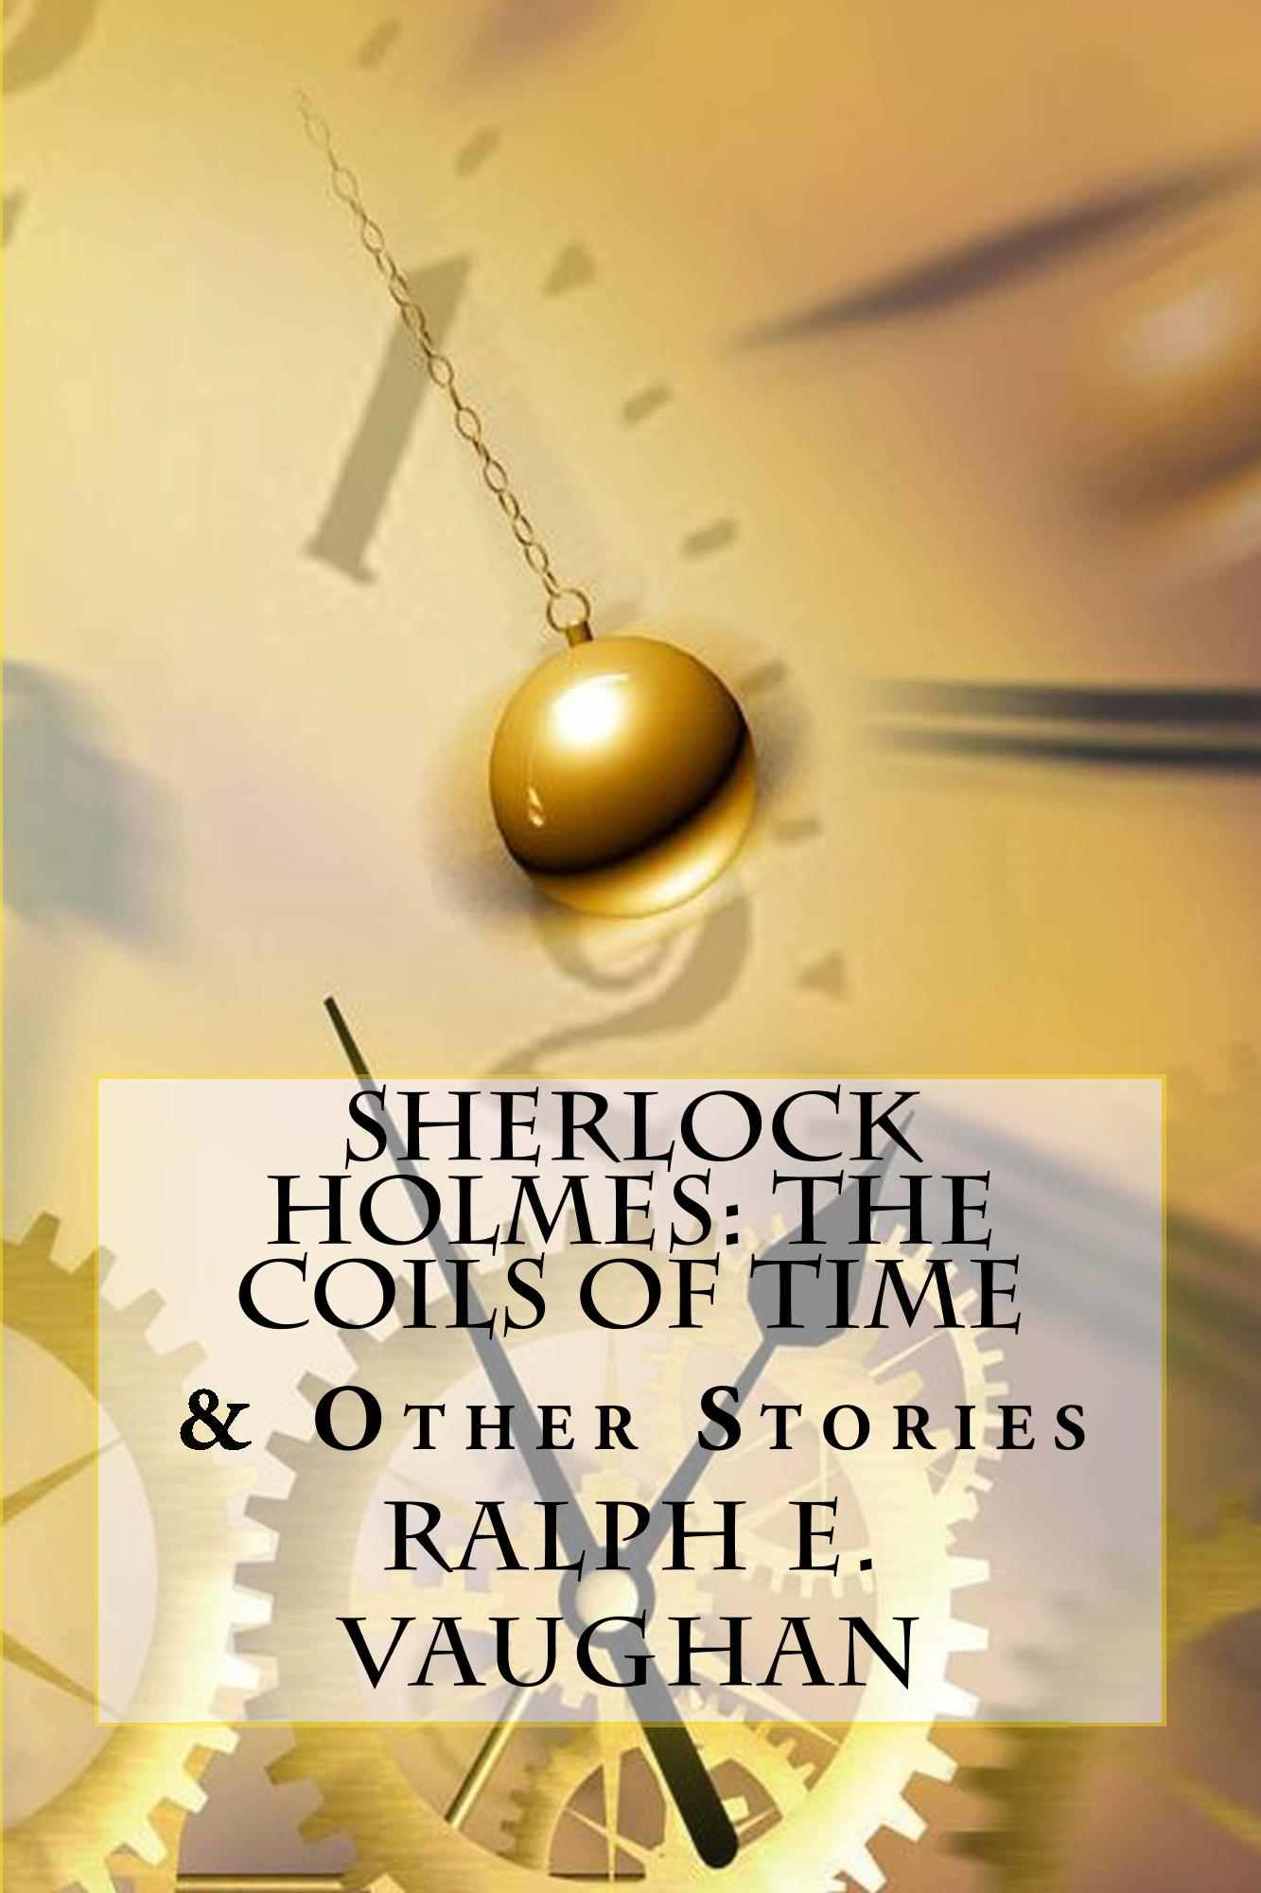 Sherlock Holmes: The Coils of Time & Other Stories (Sherlock Holmes Adventures Book 1) by Ralph Vaughan